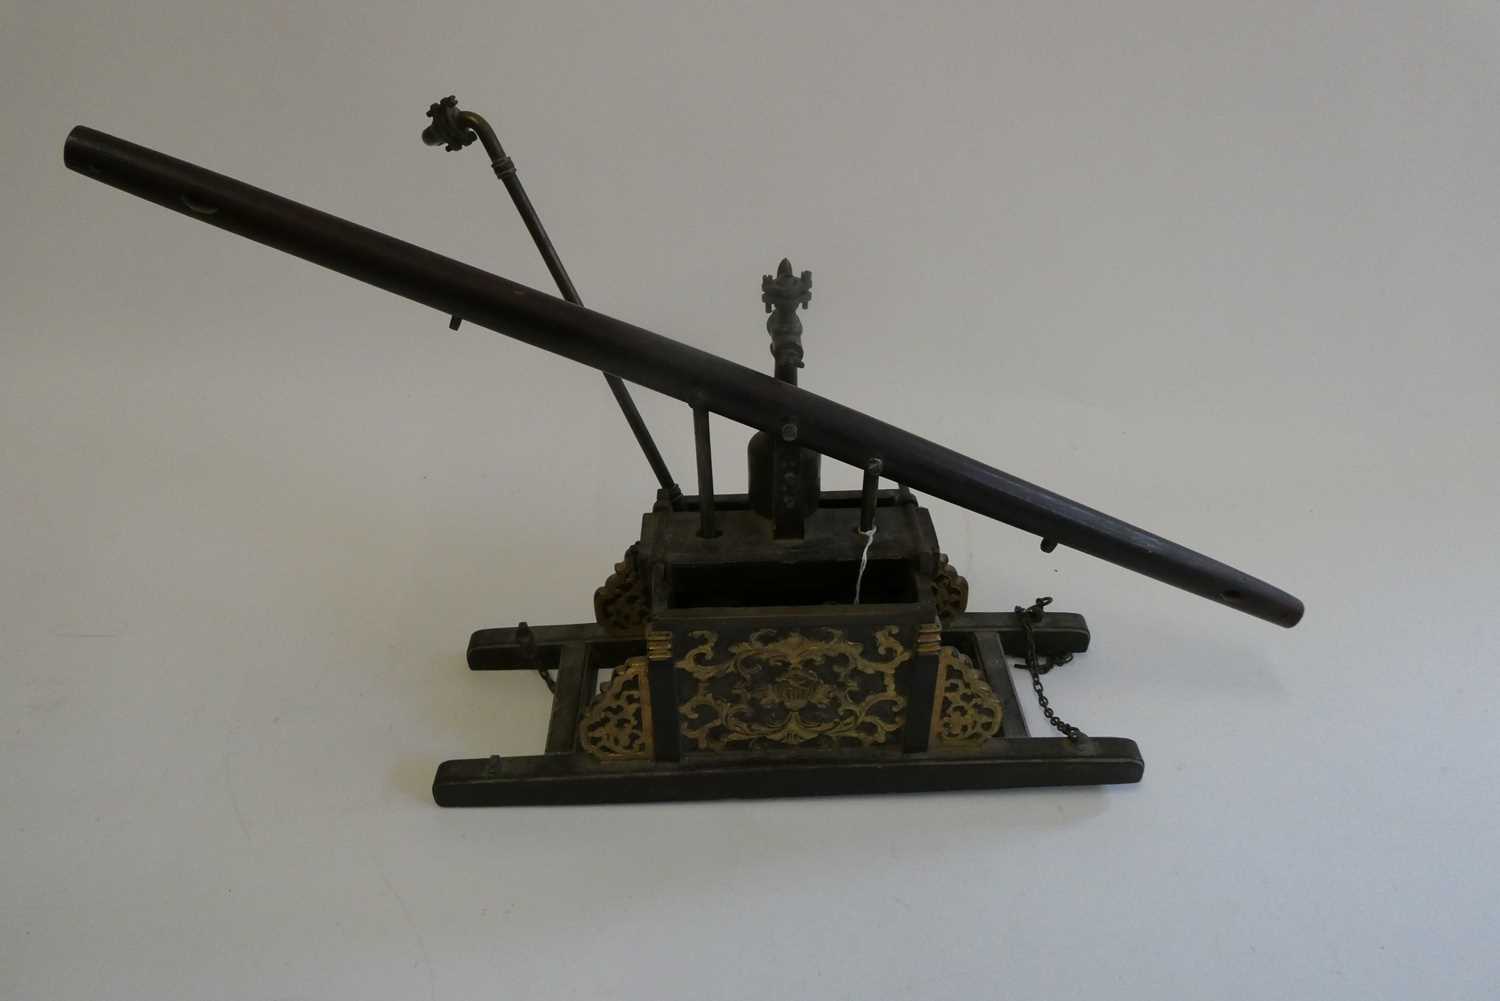 Model of Chinese hand operated fire water pump, wood and brass construction, carved decoration to